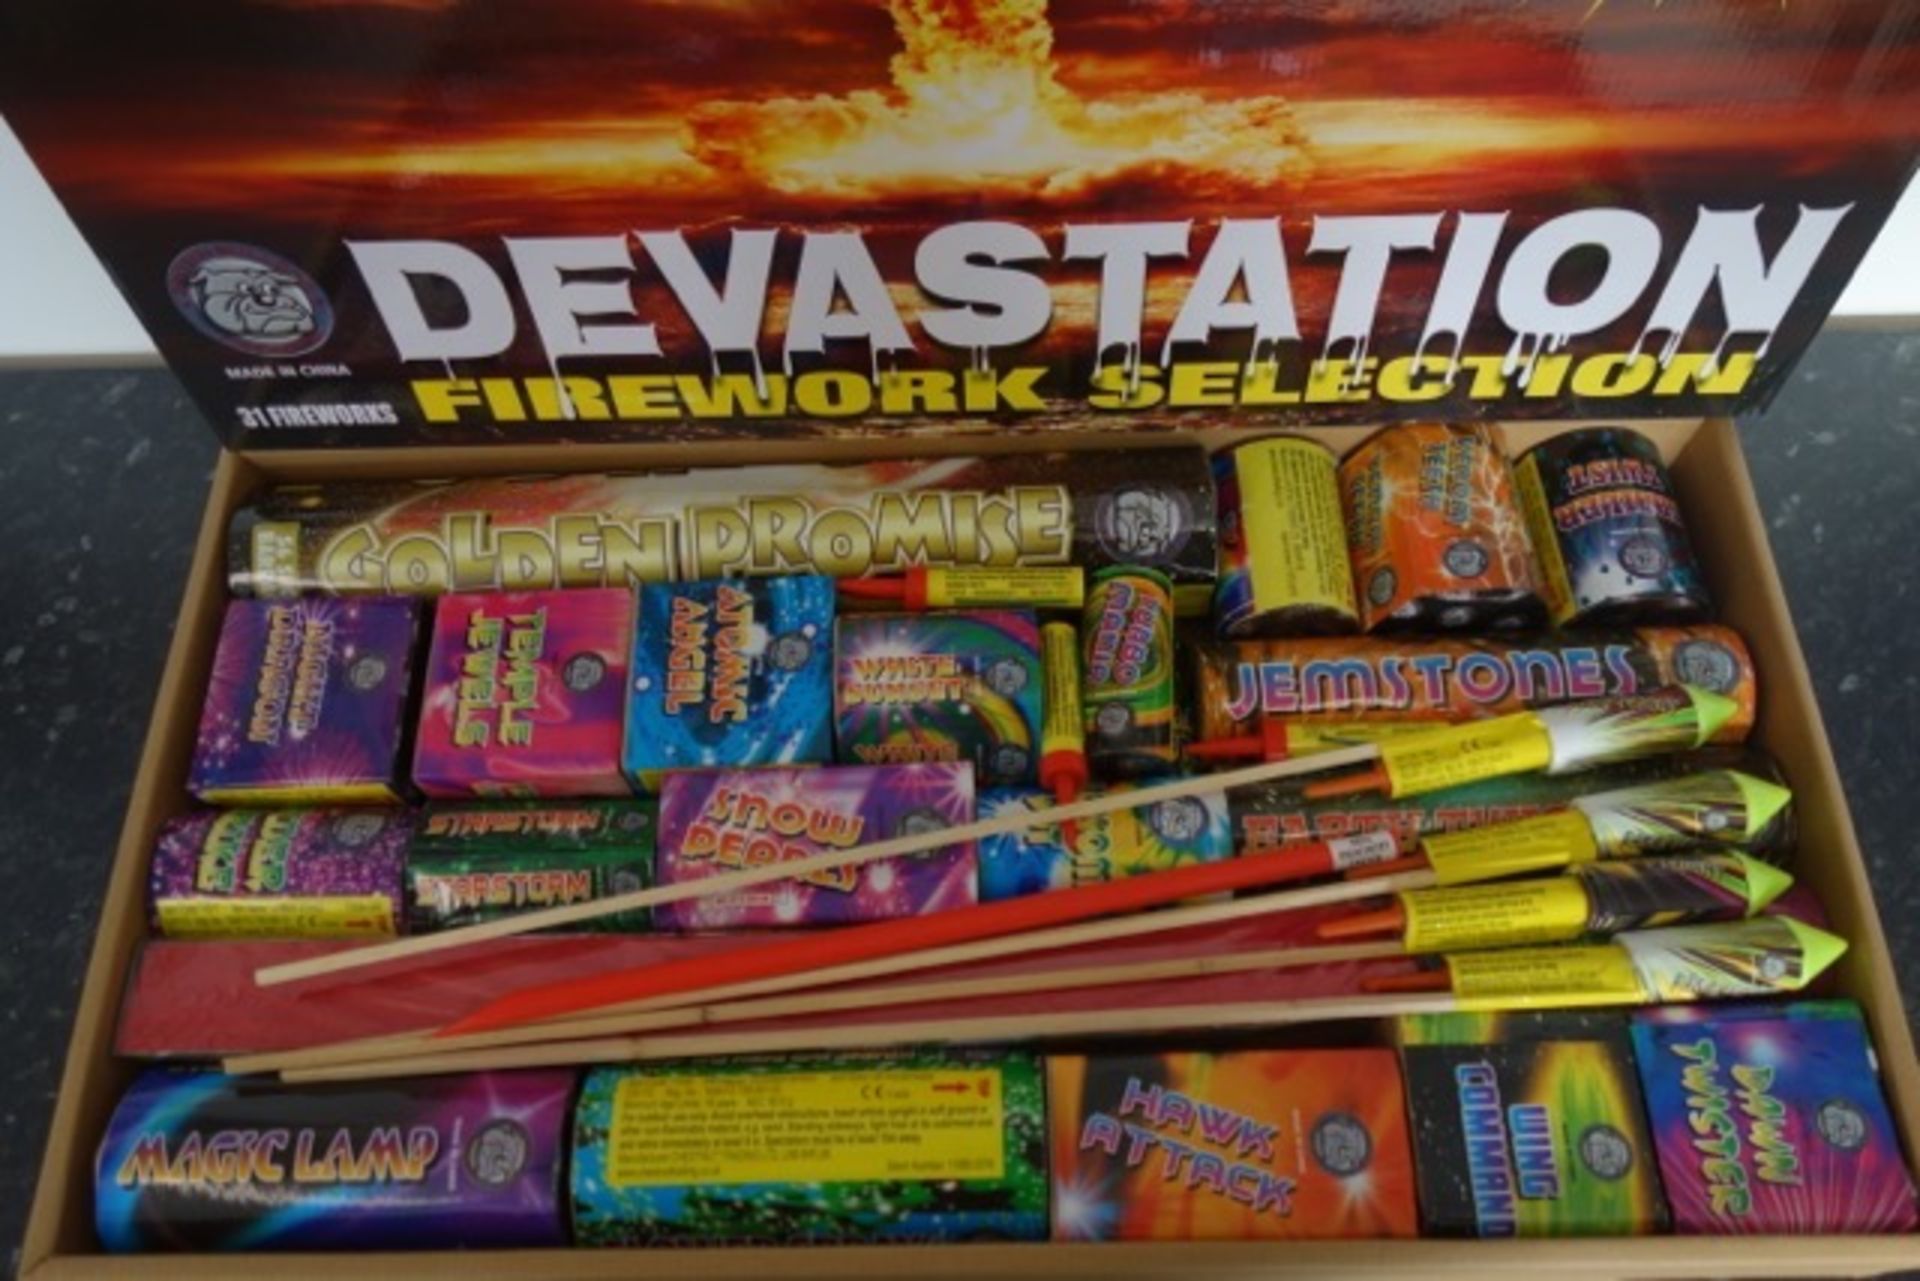 1 x DEVASTATION ULTIMATE SELECTION BOX BY BRITISH BULLDOG FIREWORK COMPANY - THIS YEARS NEW LOOK - Image 2 of 3